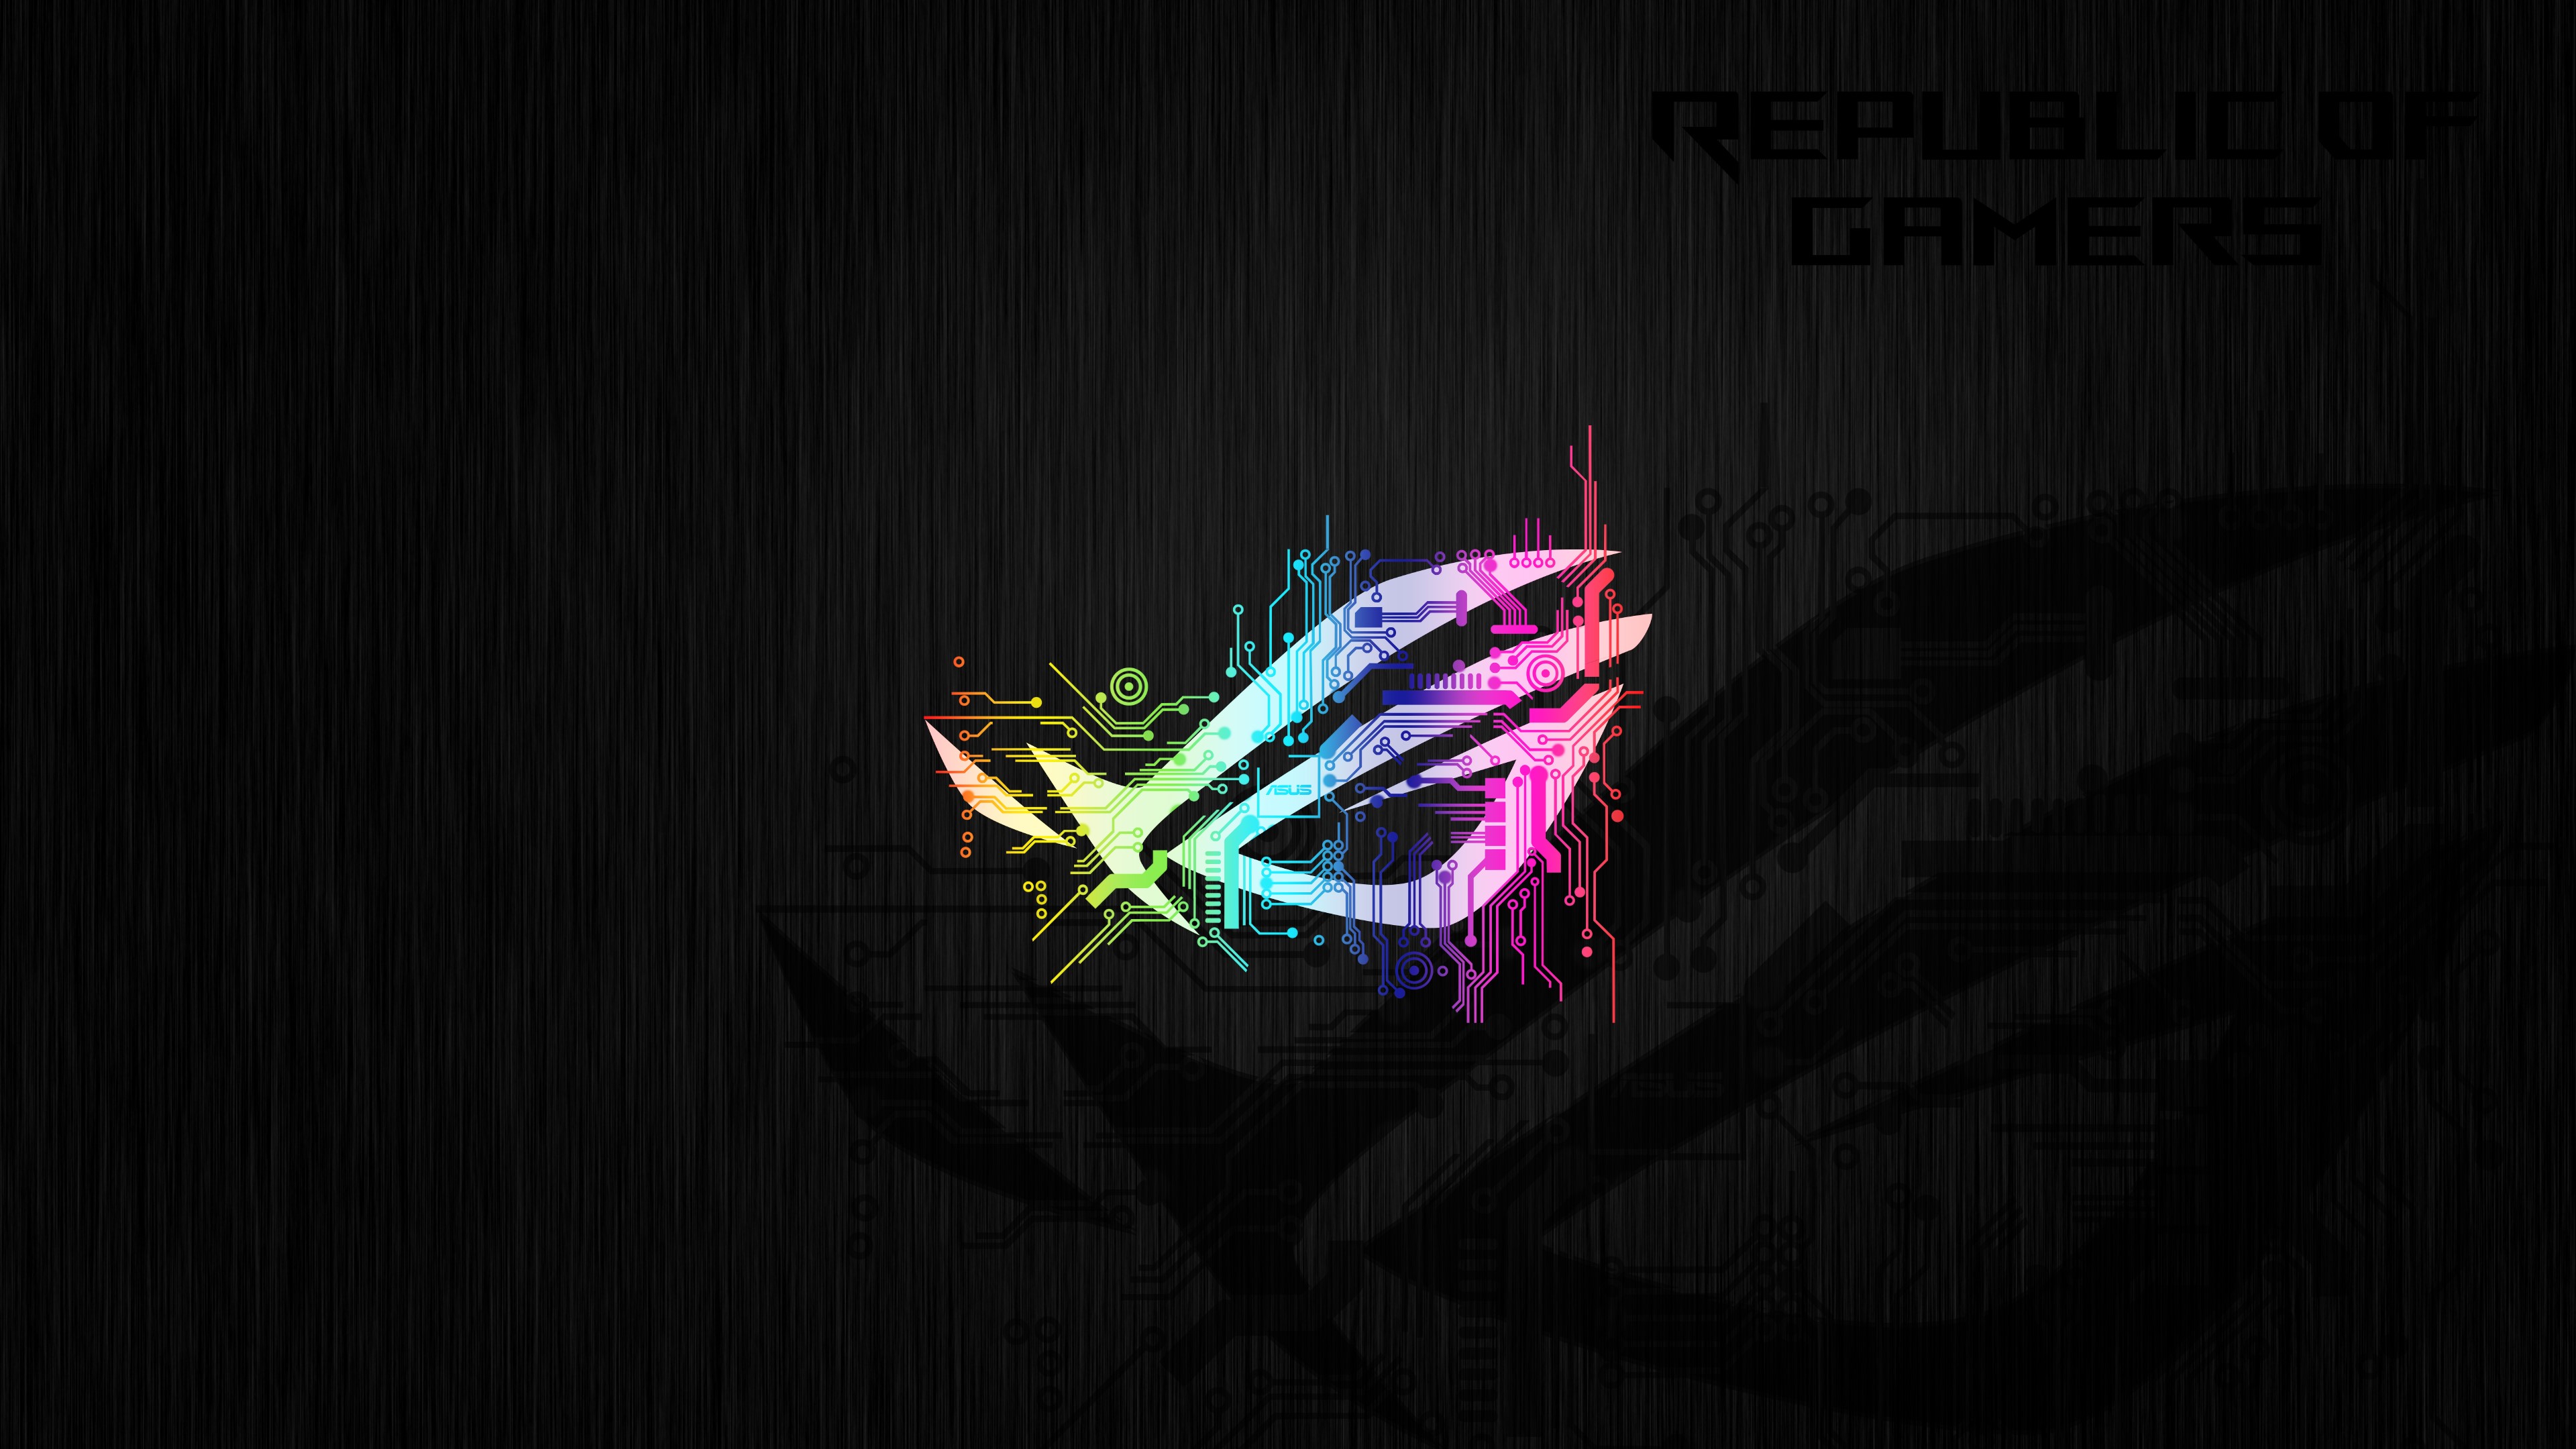 Wallpaper / republic of gamers, asus, computer, games, hd, 4k, logo, abstract free download